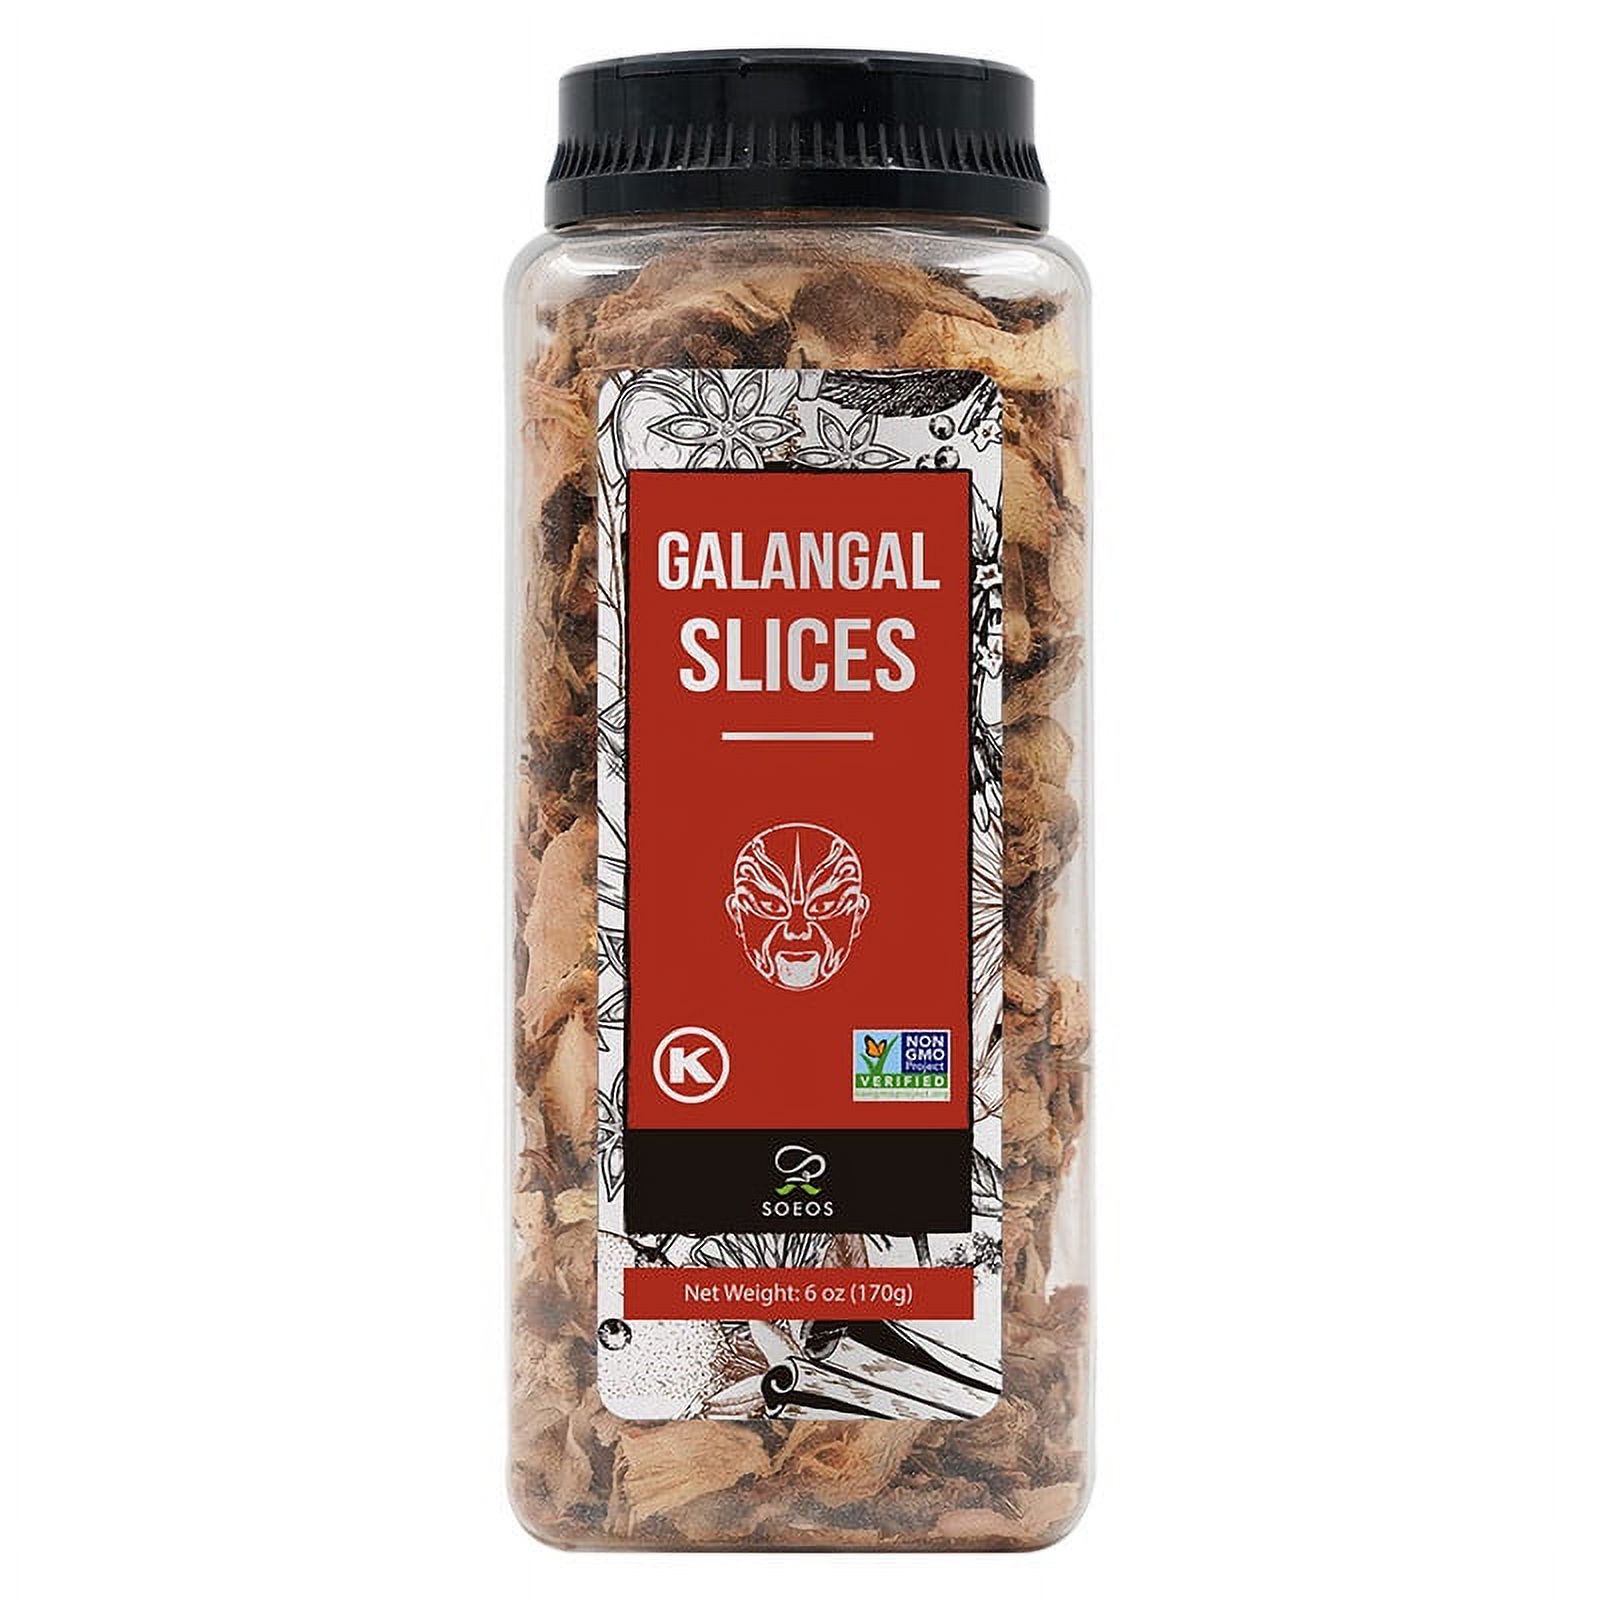 Soeos Galangal Slices 6oz, Fresh Galangia, Non-GMO and Kosher, Spicy and Slightly Sweet Flavor, Perfect for Tom Yum and Tom Kha Soup Recipes - image 1 of 7